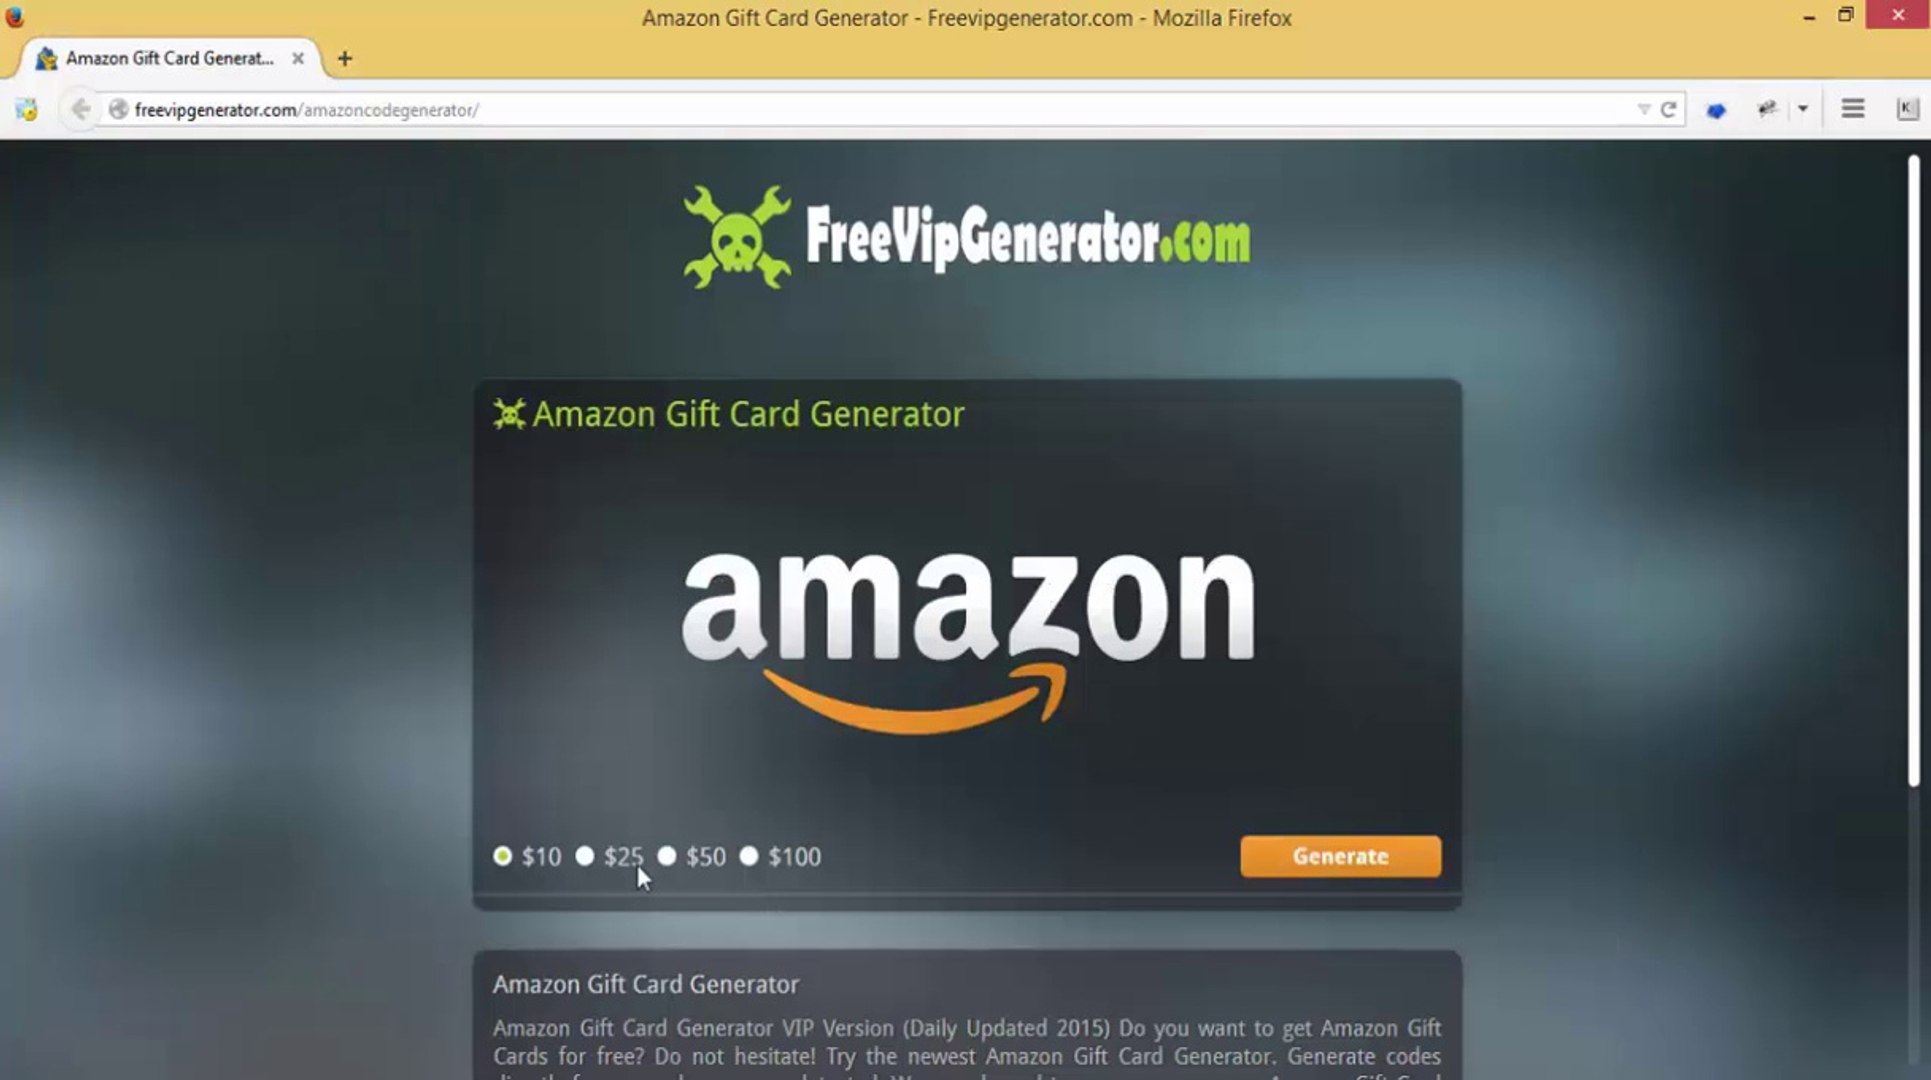 Amazon Gift Card Generator 2015 New Version Leaked Video